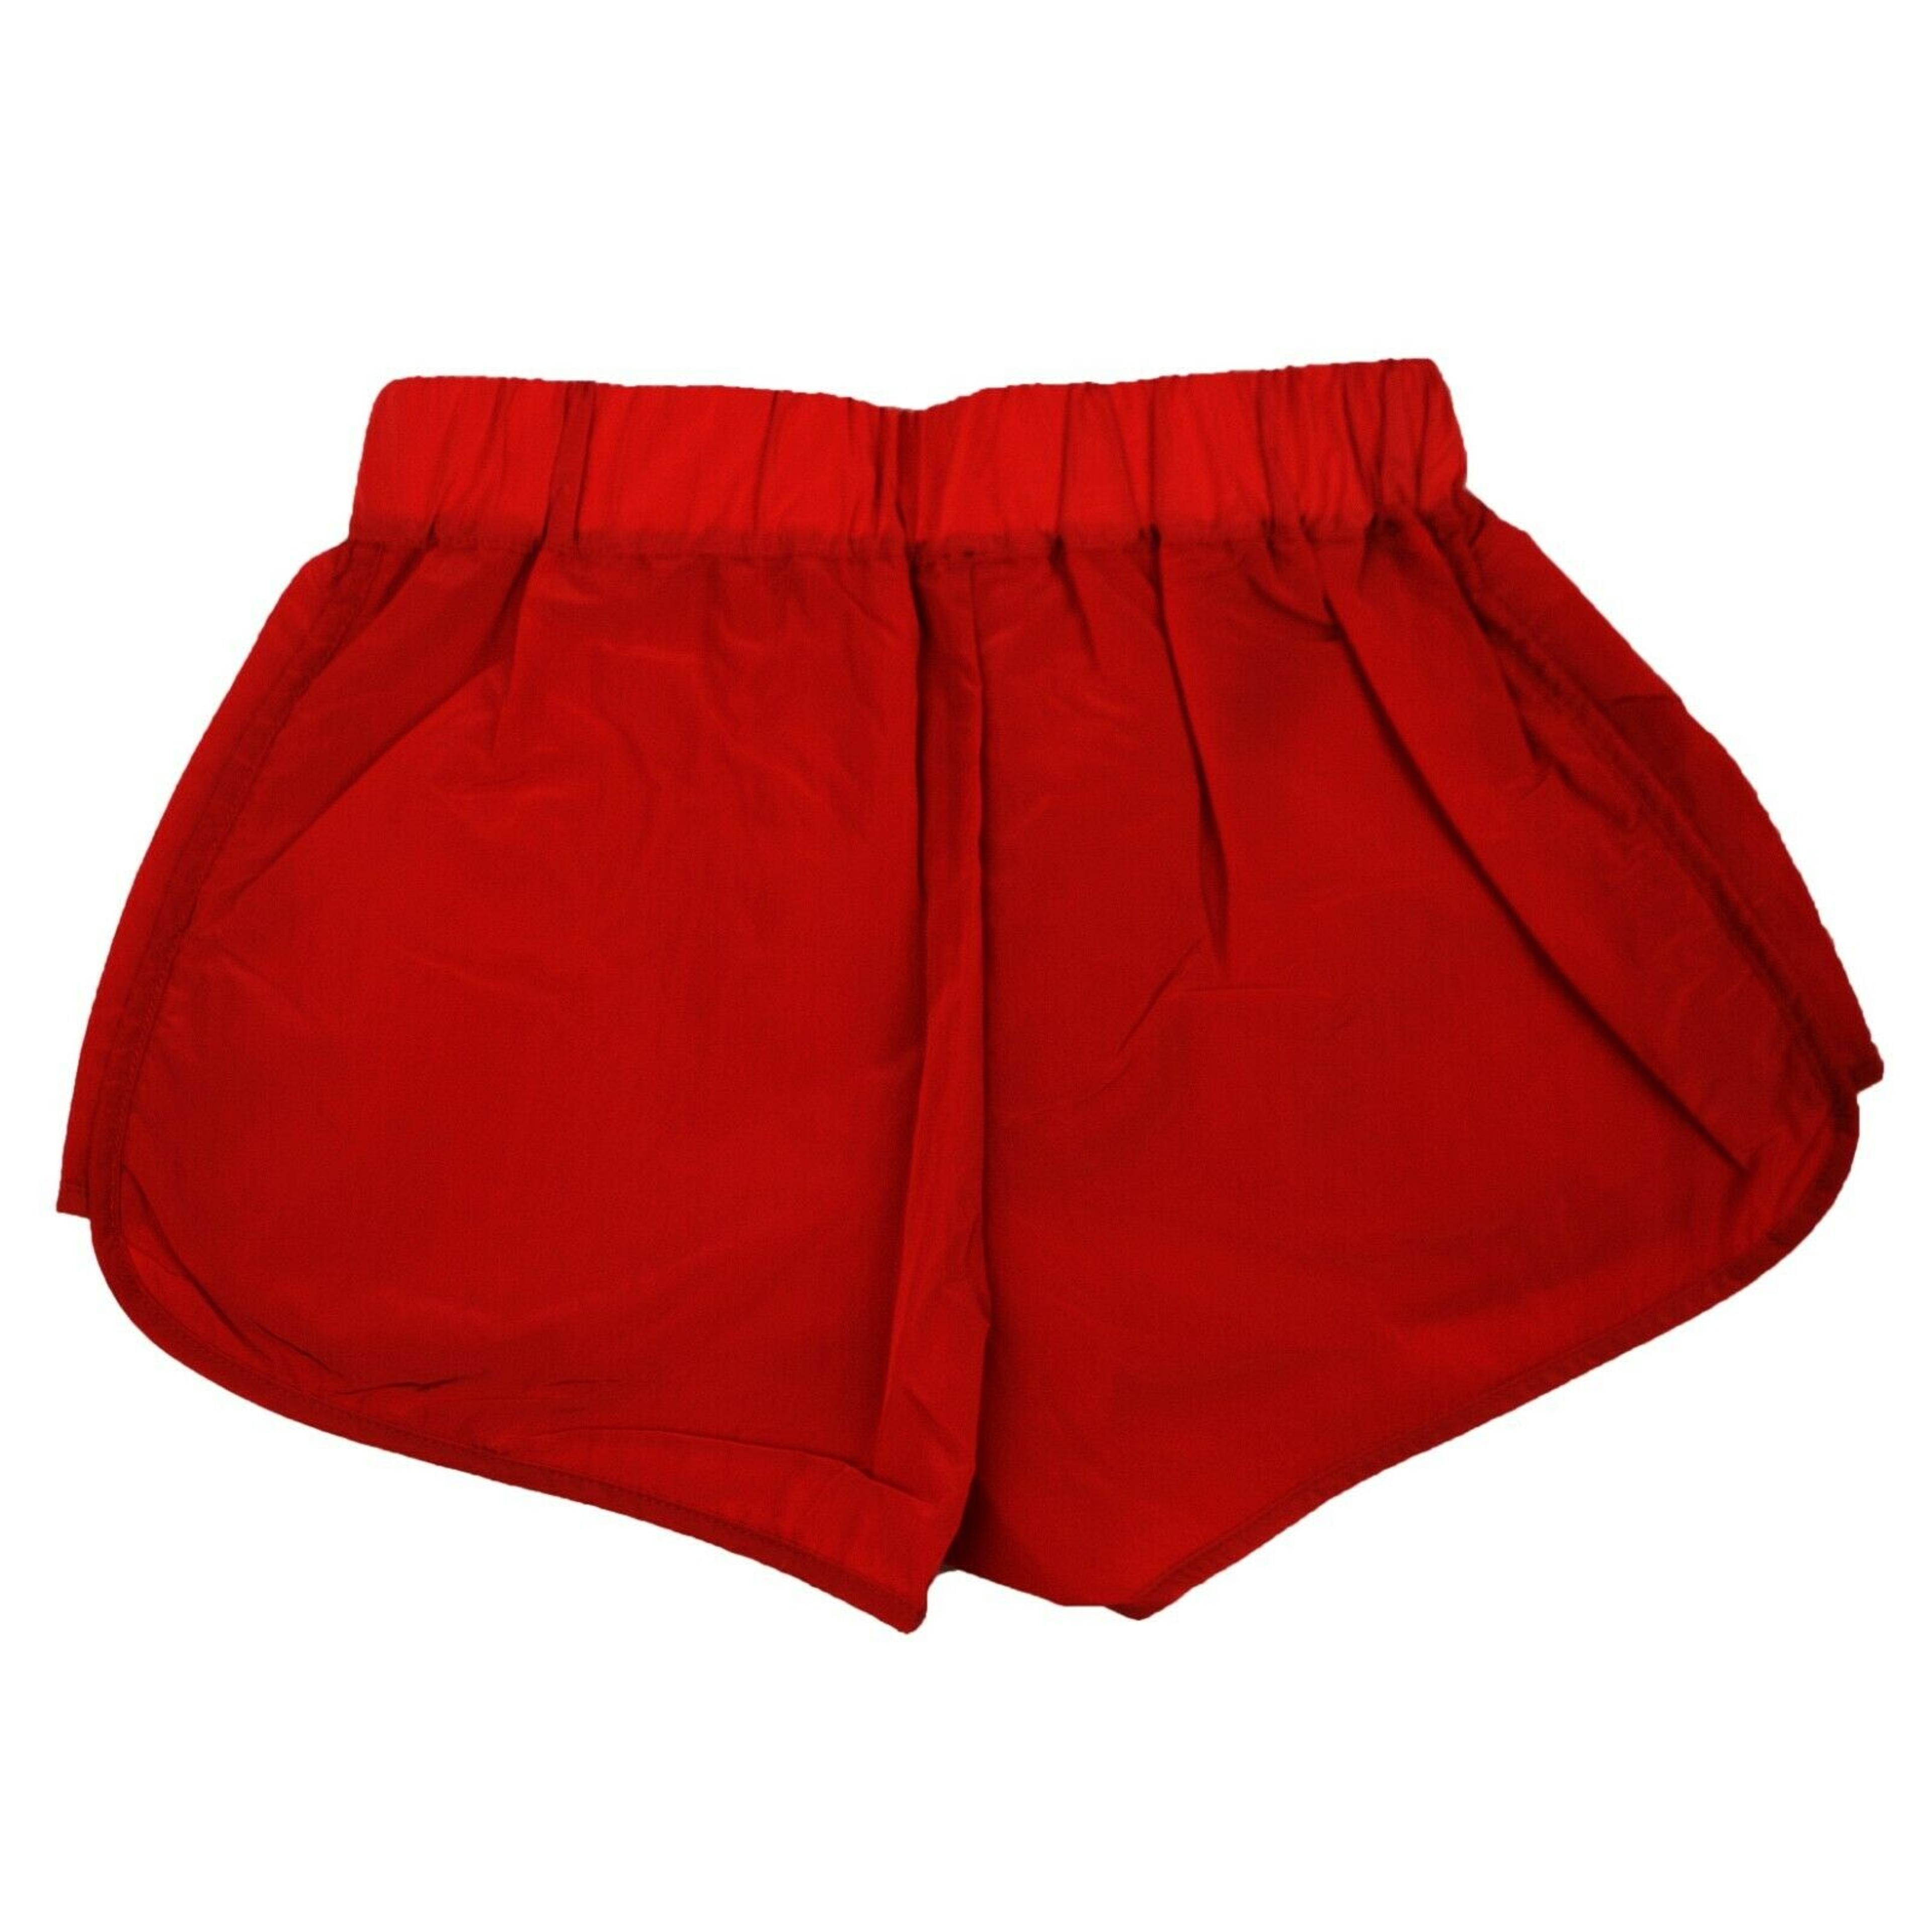 Alternate View 1 of Red Lace Up Track Short Pants